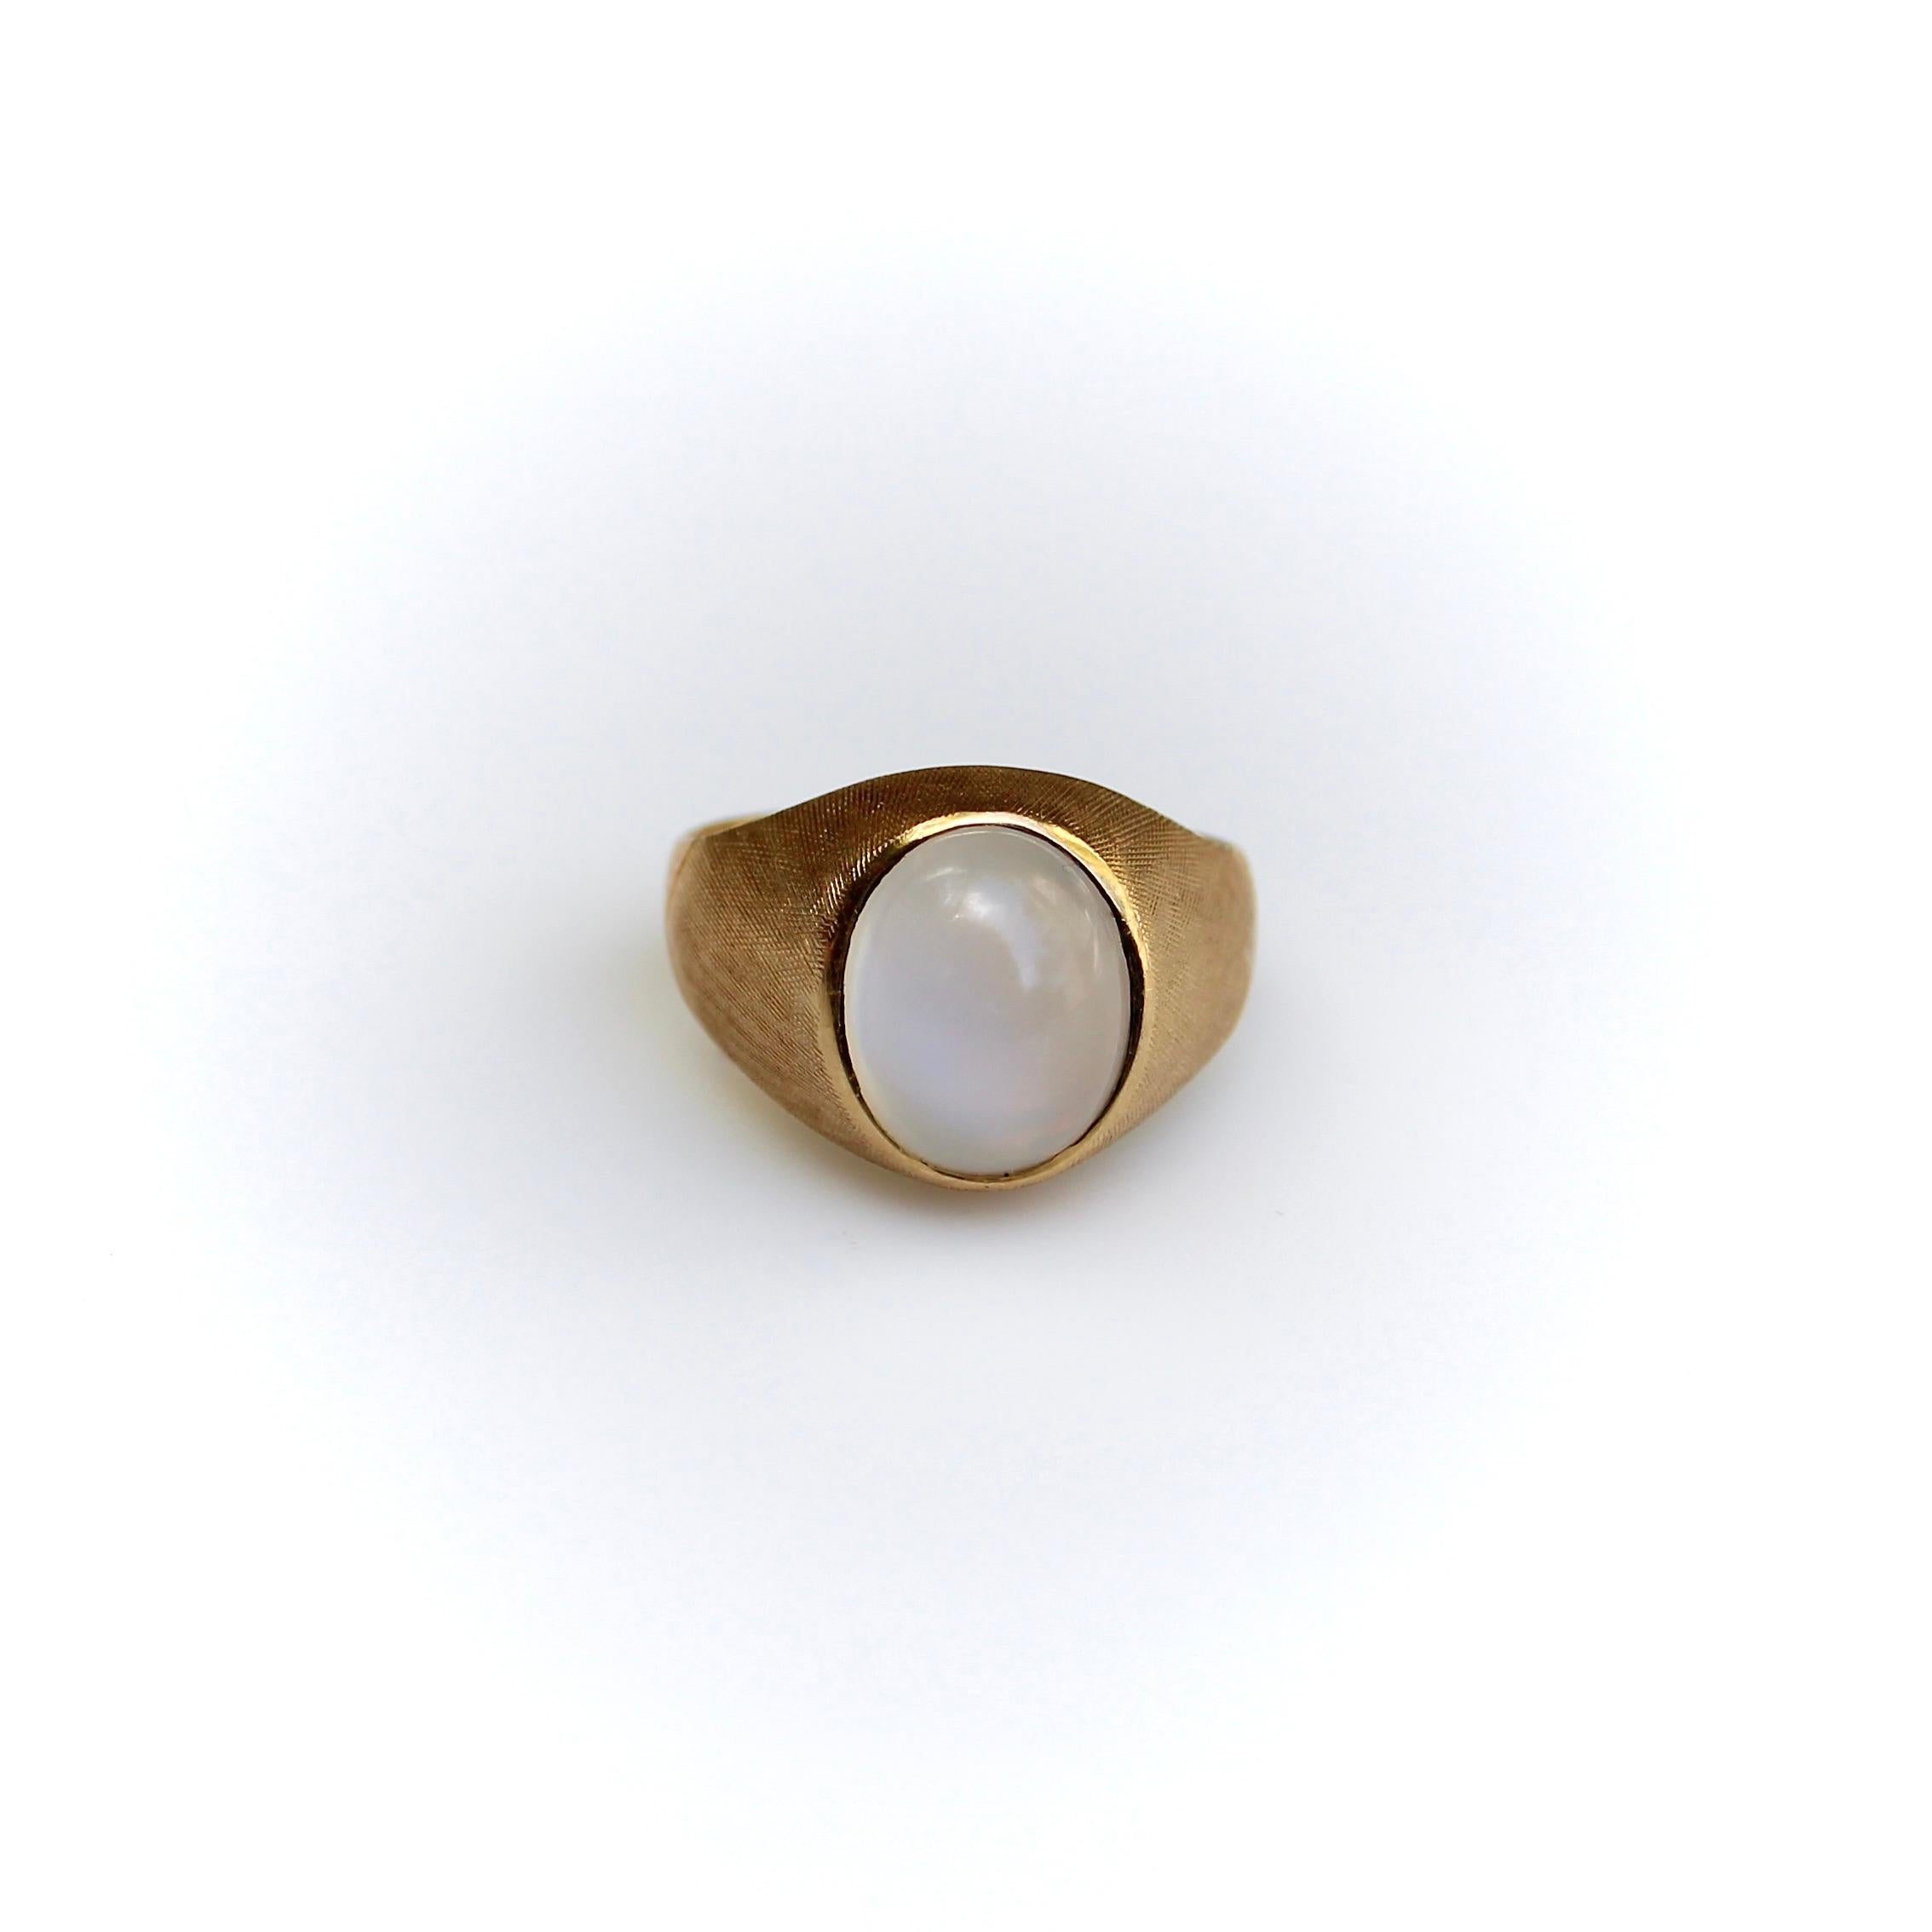 This retro Tiffany & Co. ring features a moonstone bezel set into an 18k gold ring with a beautiful Florentine finish. The ring has a high profile; the deep cabochon goes from milky white to a blue glow, with a cat’s eye that moves in the light. The